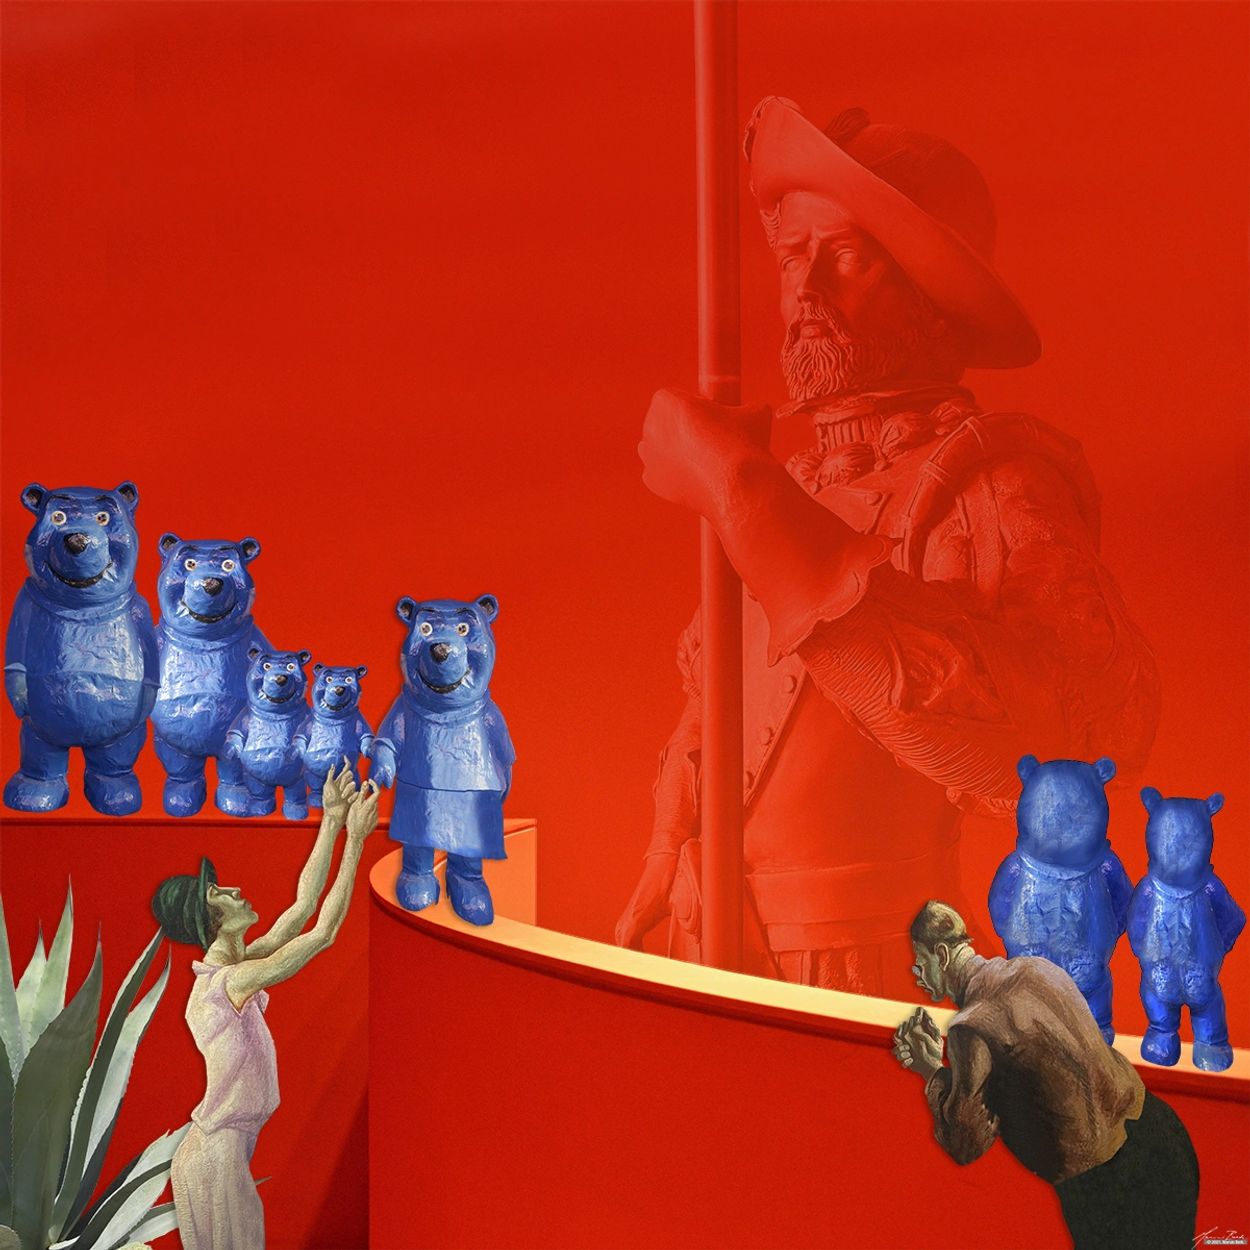 Photomontage by photo artist Marvin Berk of Blue Bears with Don Quixote looking on.